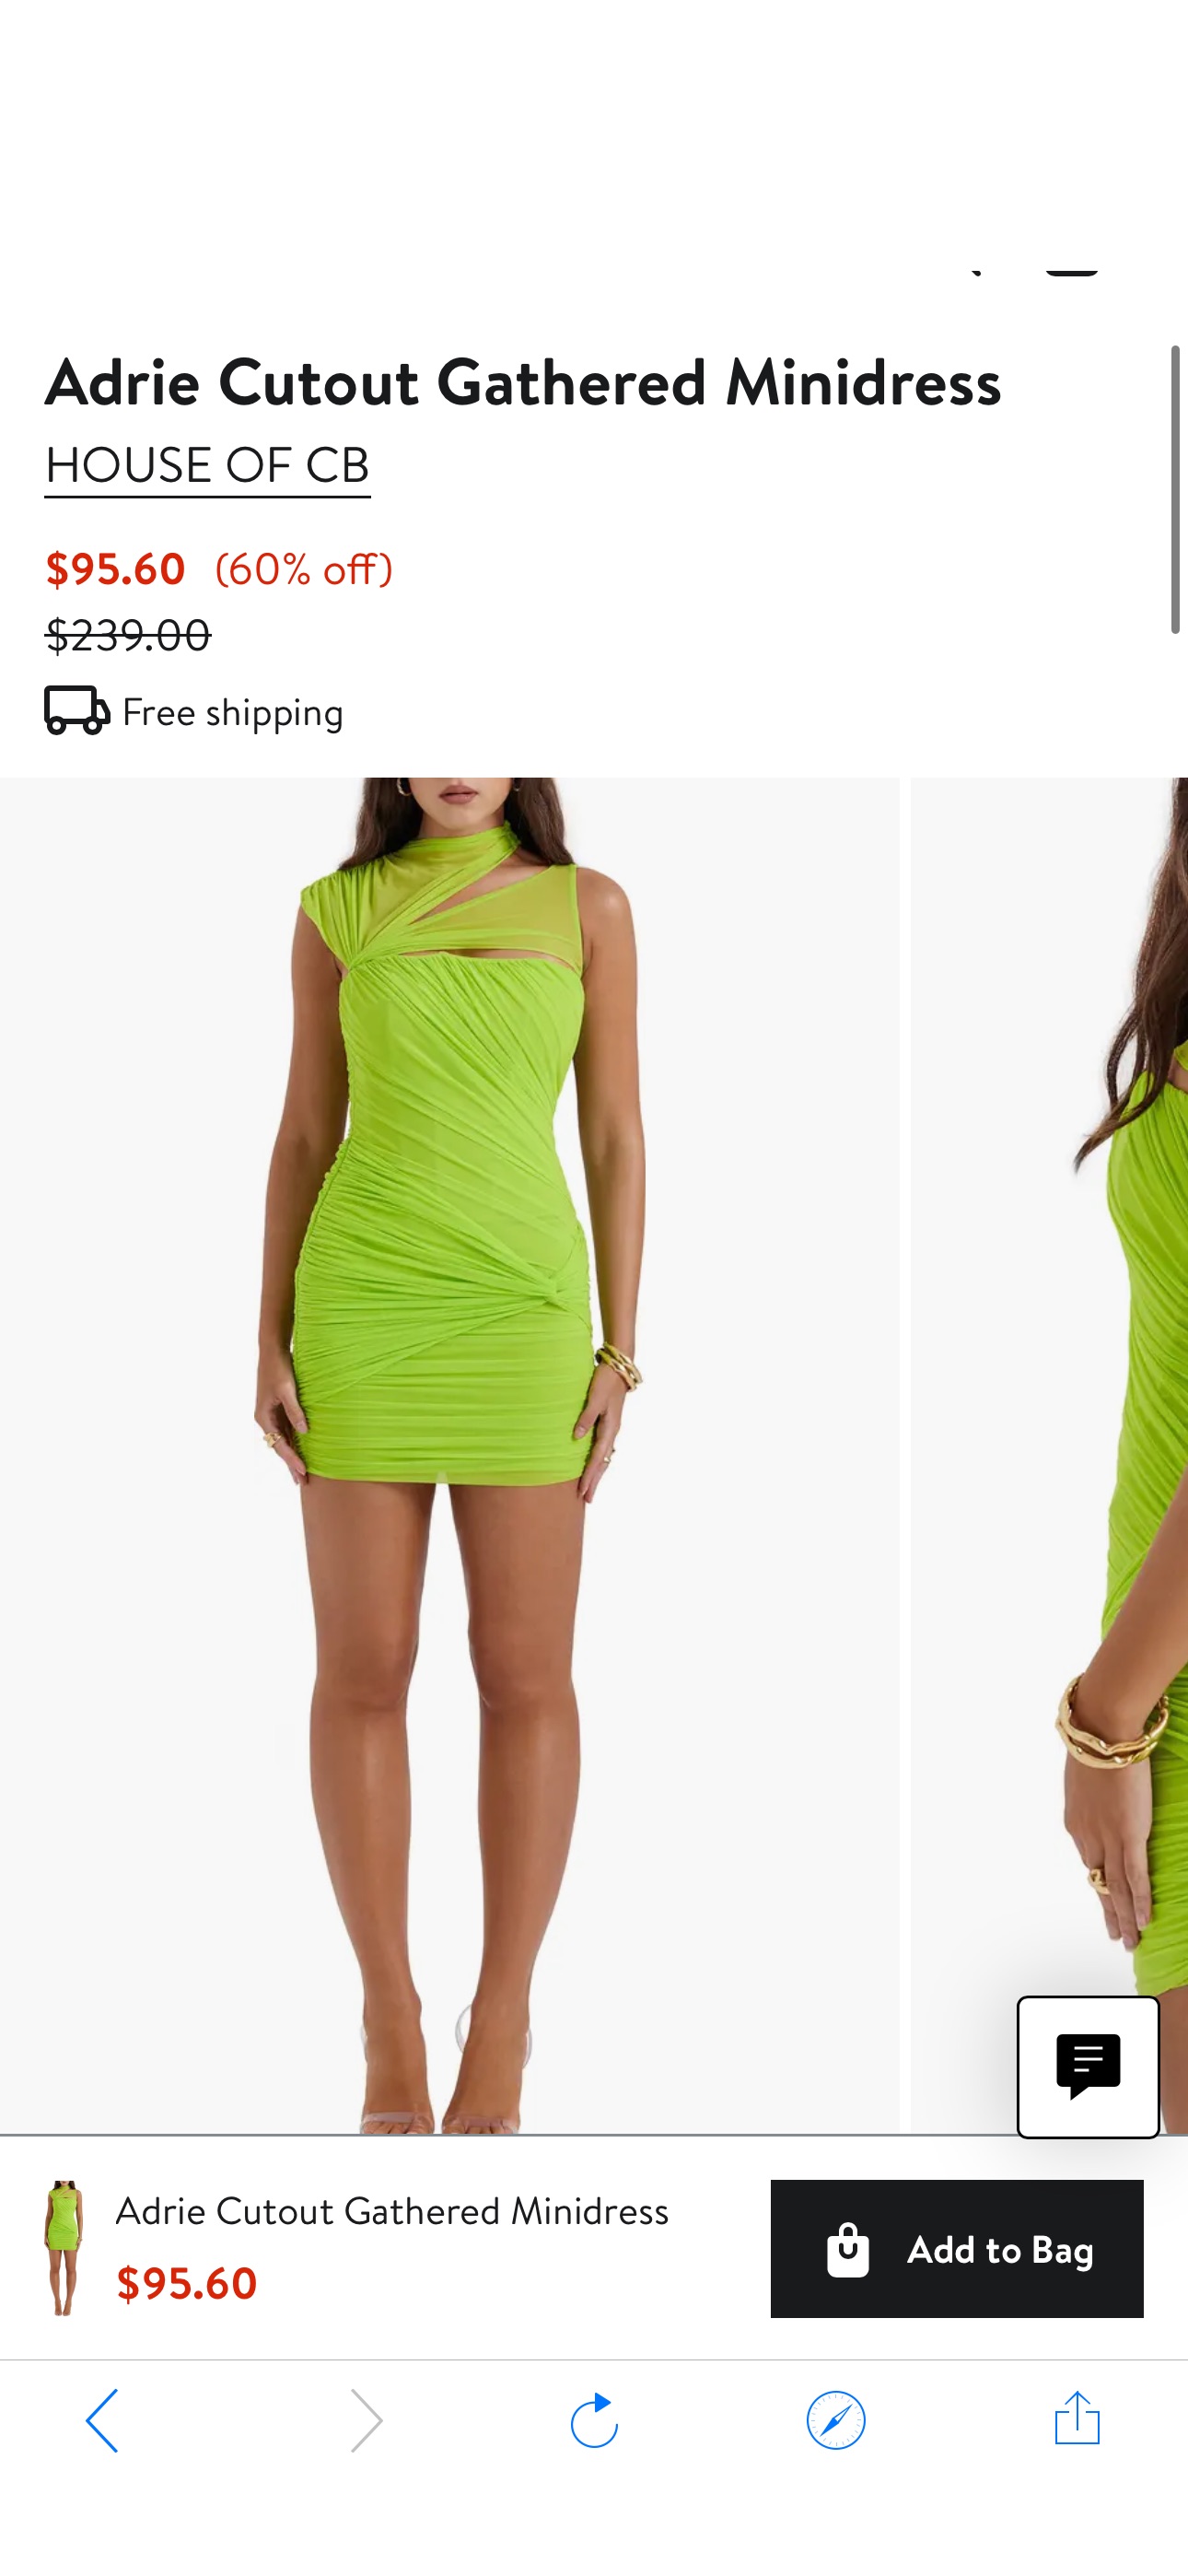 HOUSE OF CB Adrie Cutout Gathered Minidress | Nordstrom